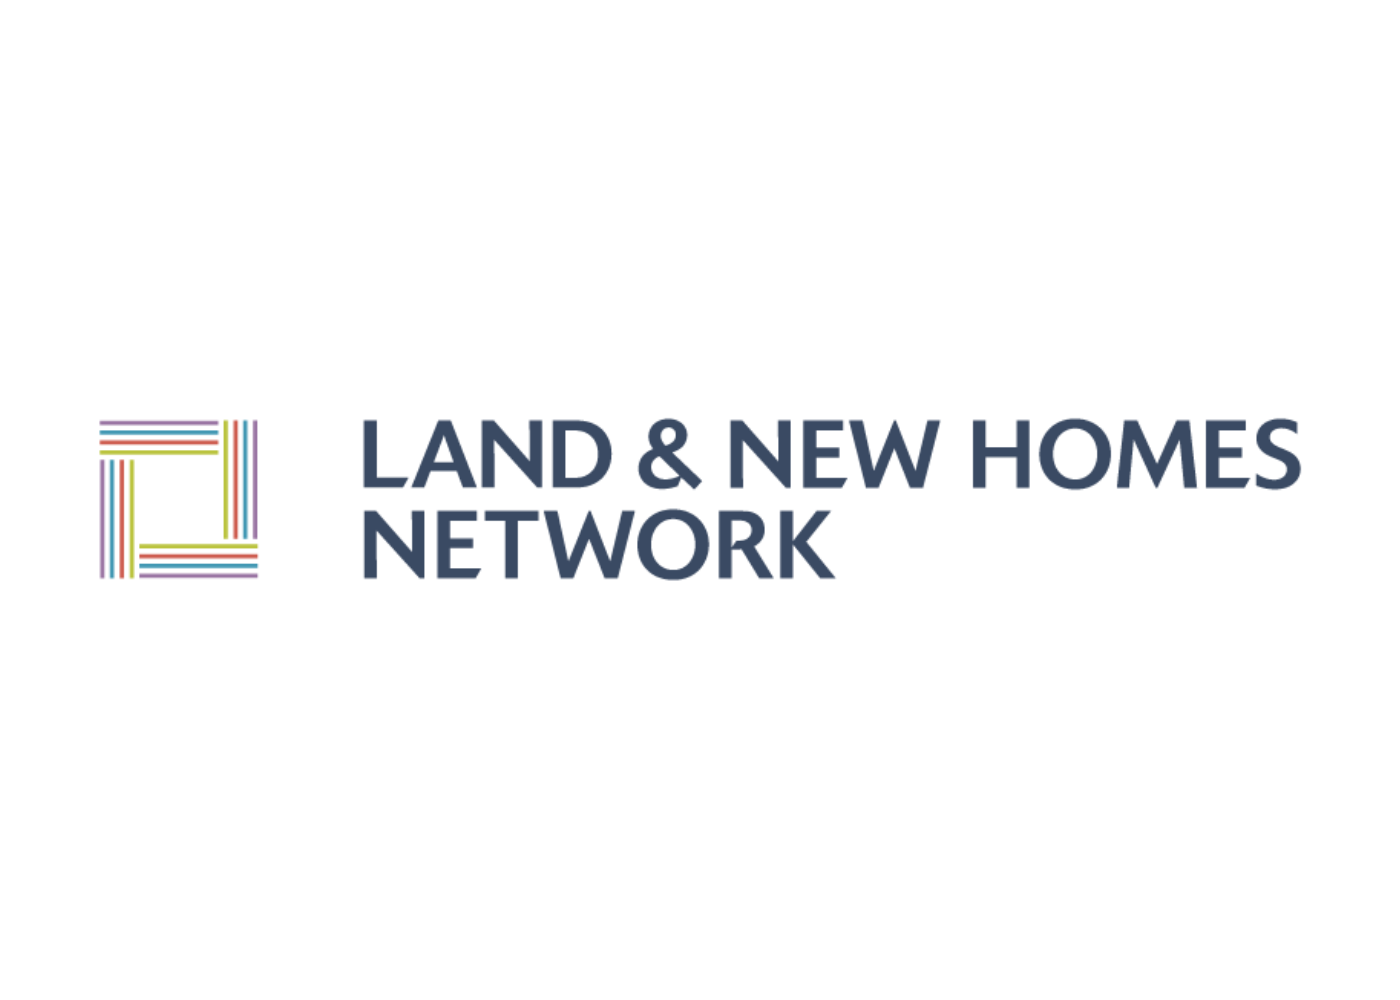 Land & New Homes Network